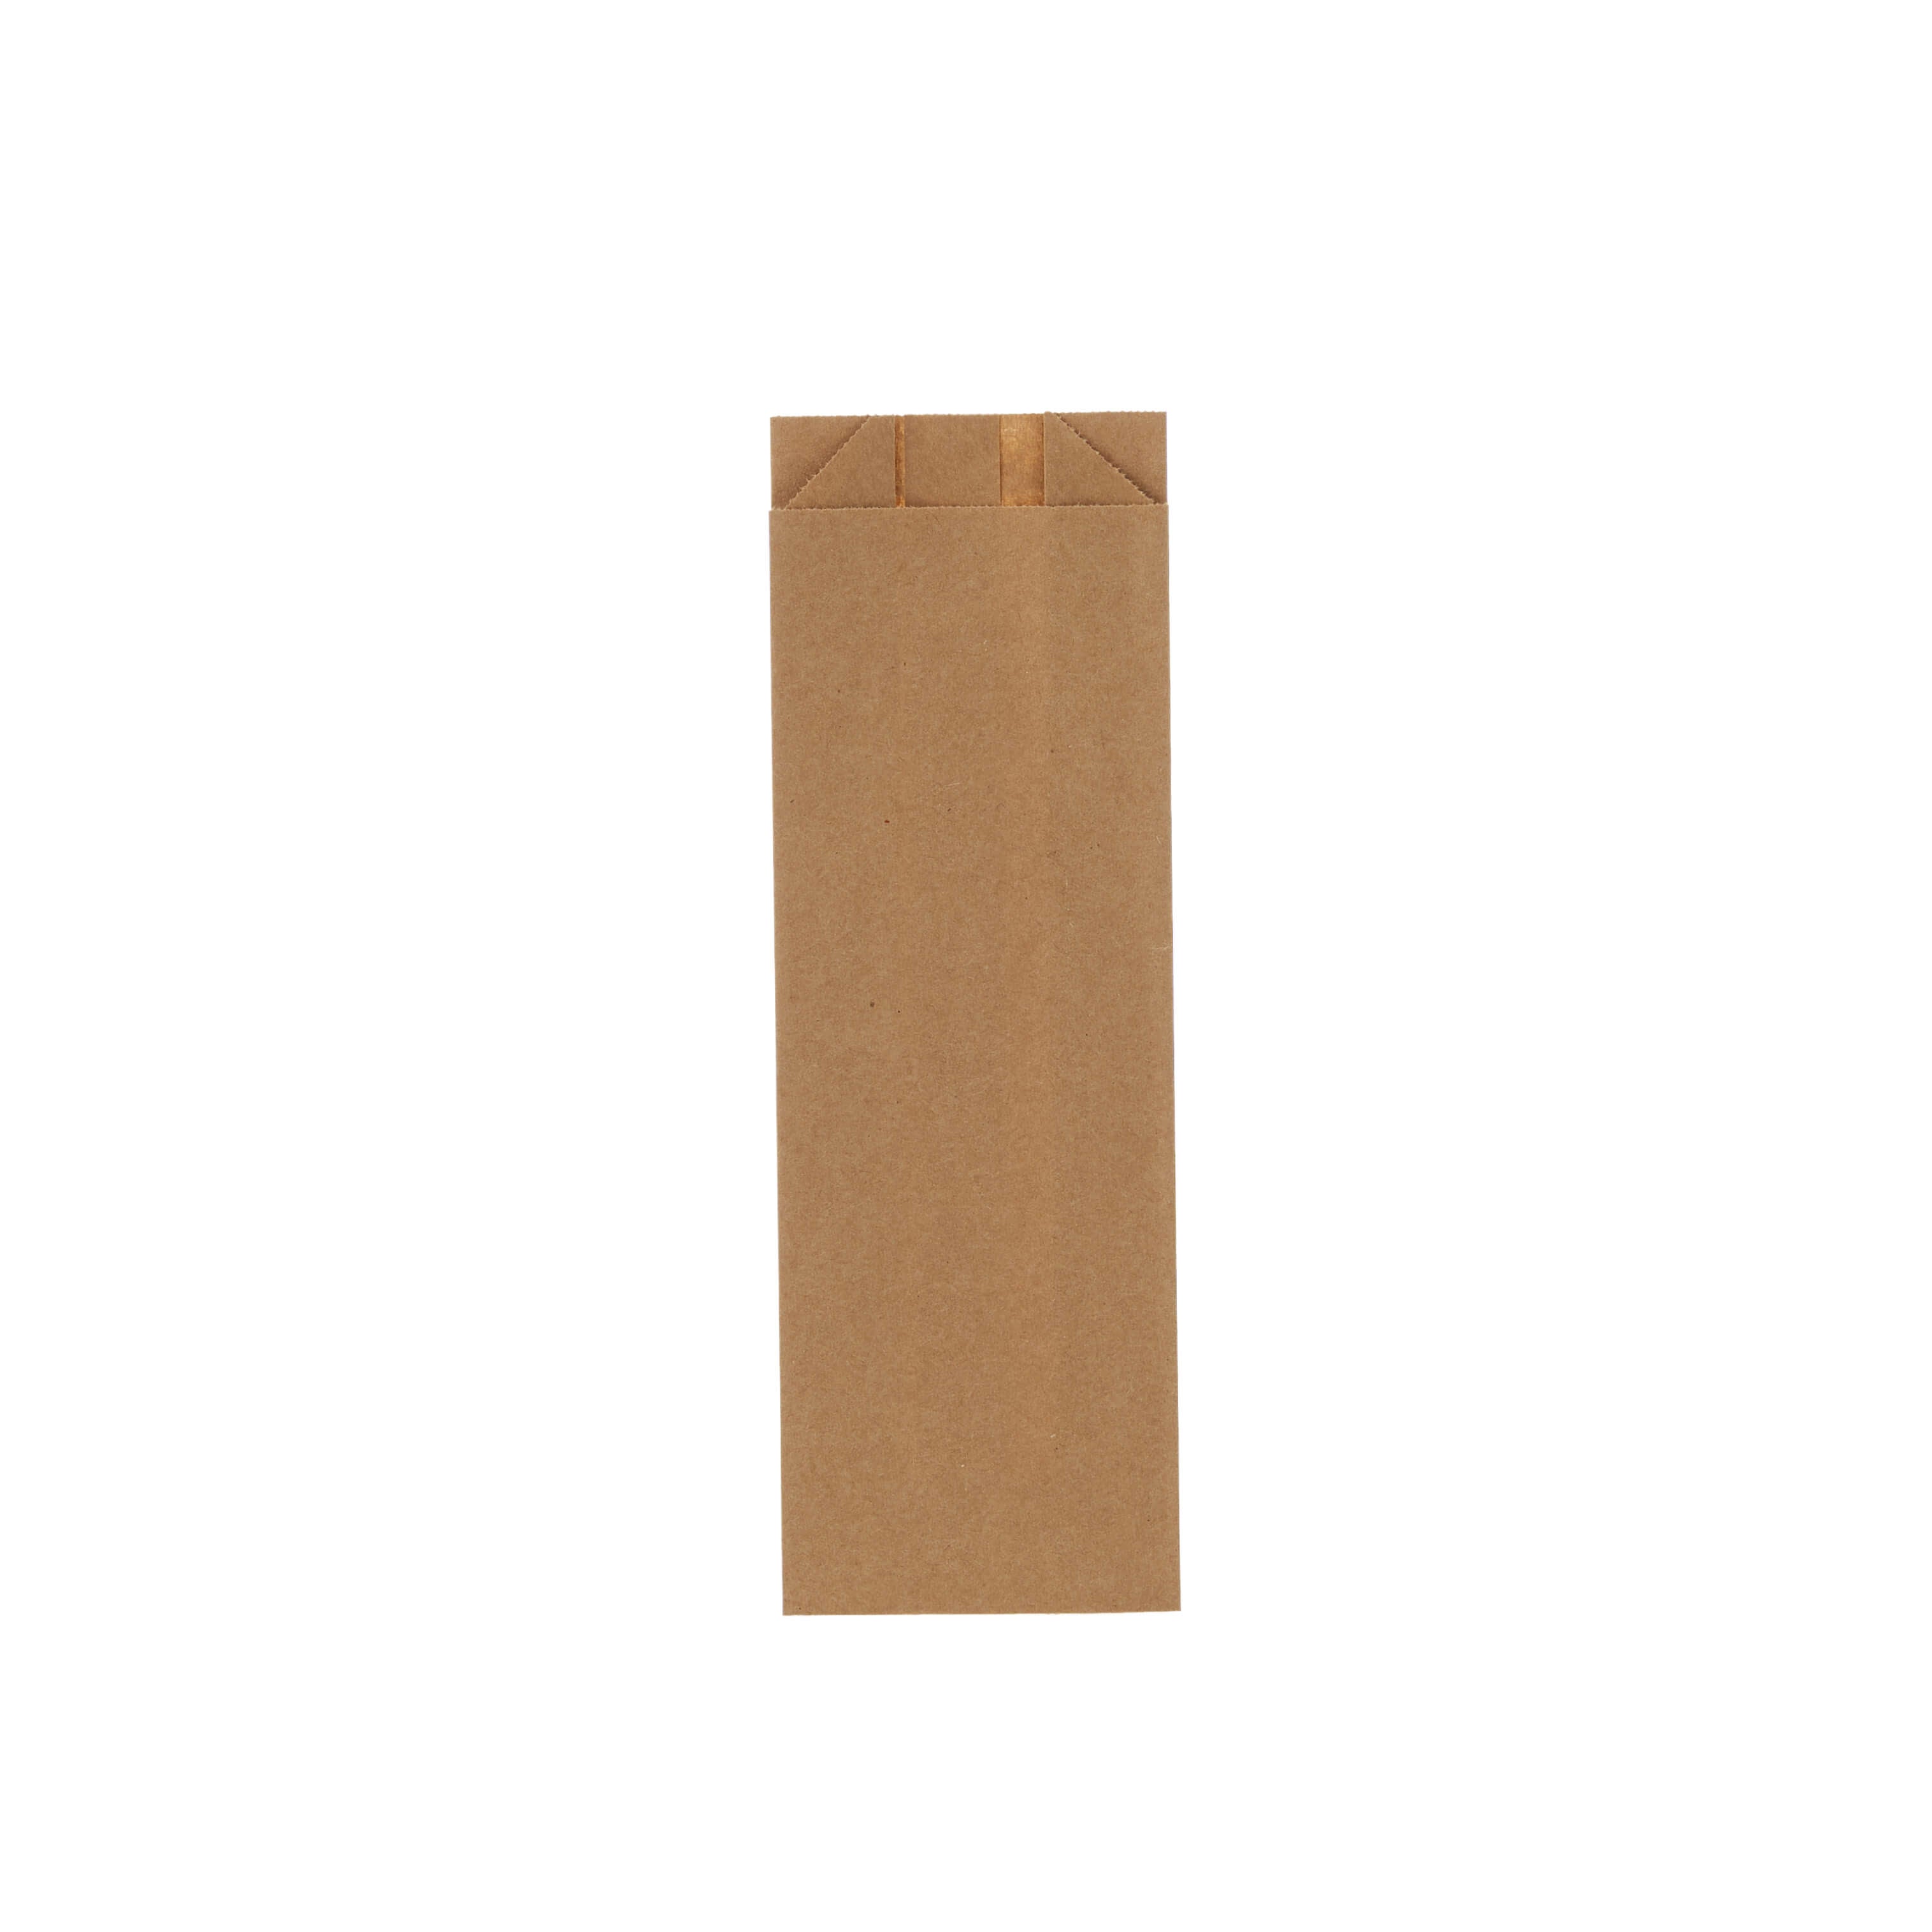 1/4 PE Foam Protective Packaging Wrap 12 X 85' Per Roll - NEW ITEM!! -  Cutting Edge Packaging Products